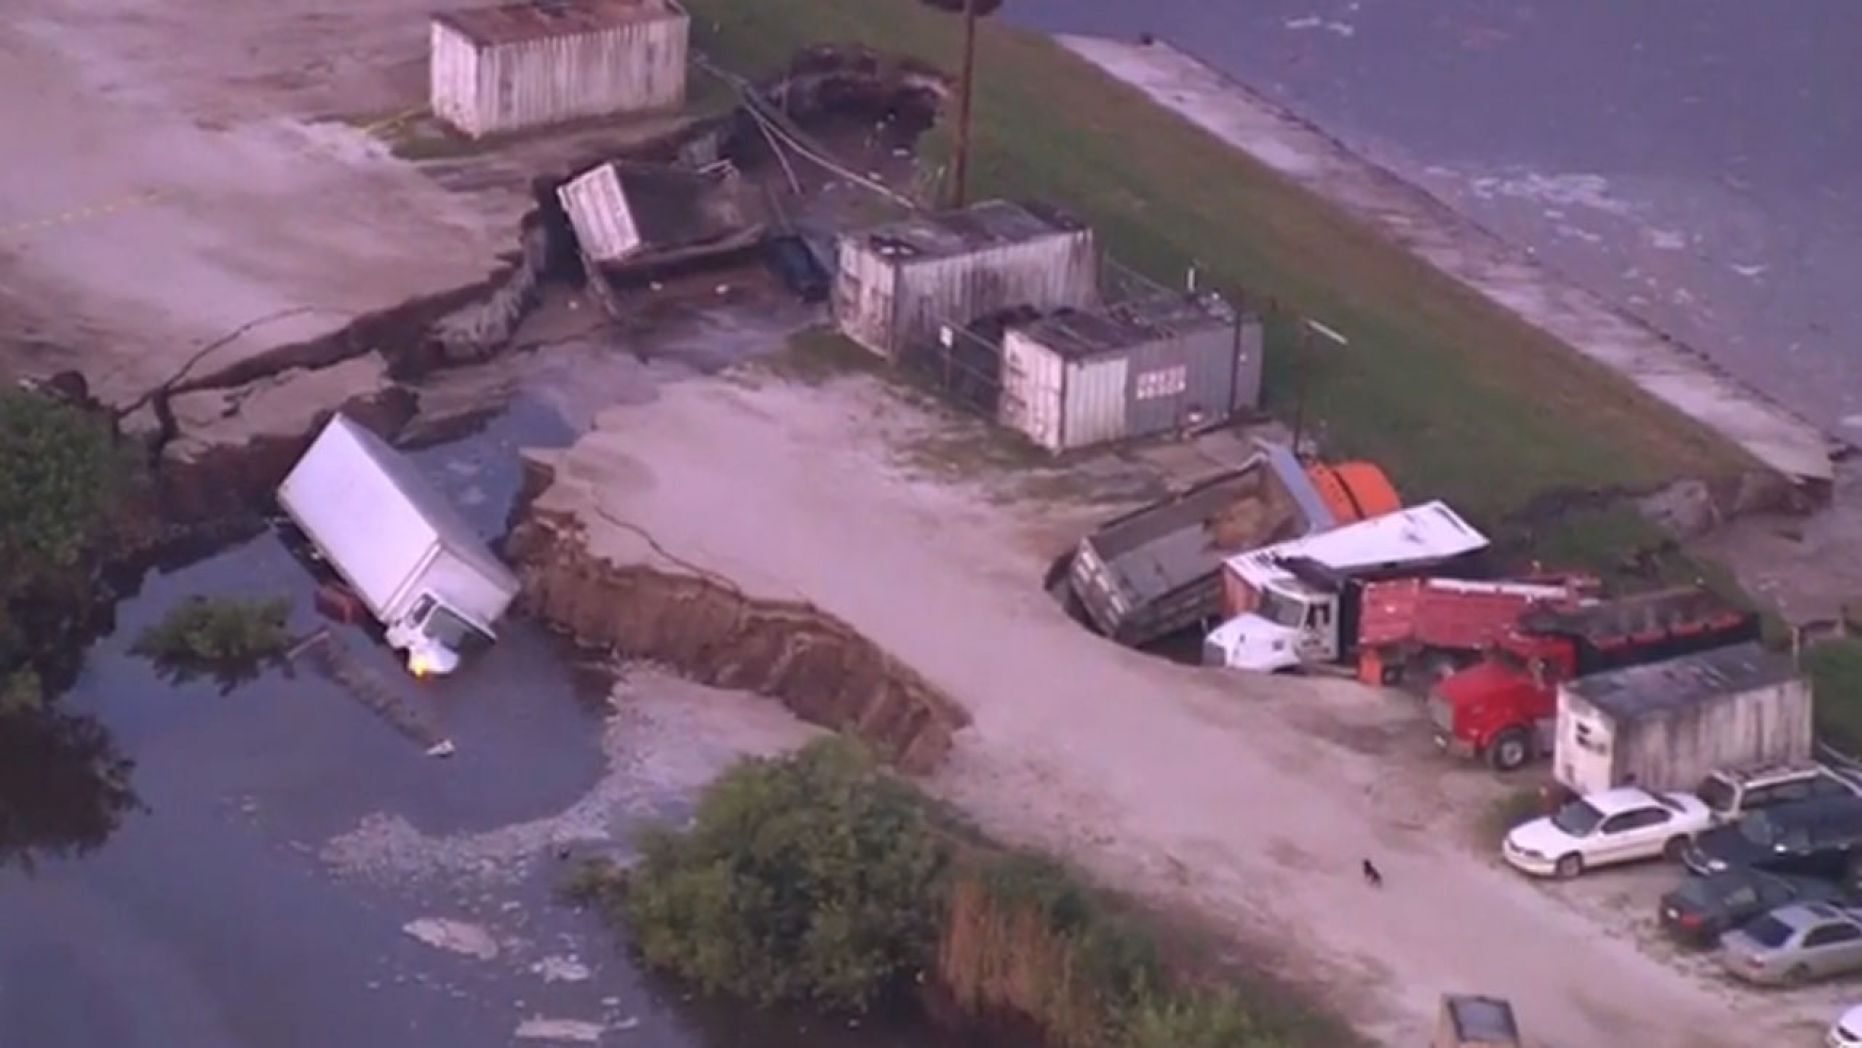 Several trucks ended up in a possible sinkhole near Orlando International Airport early Wednesday.